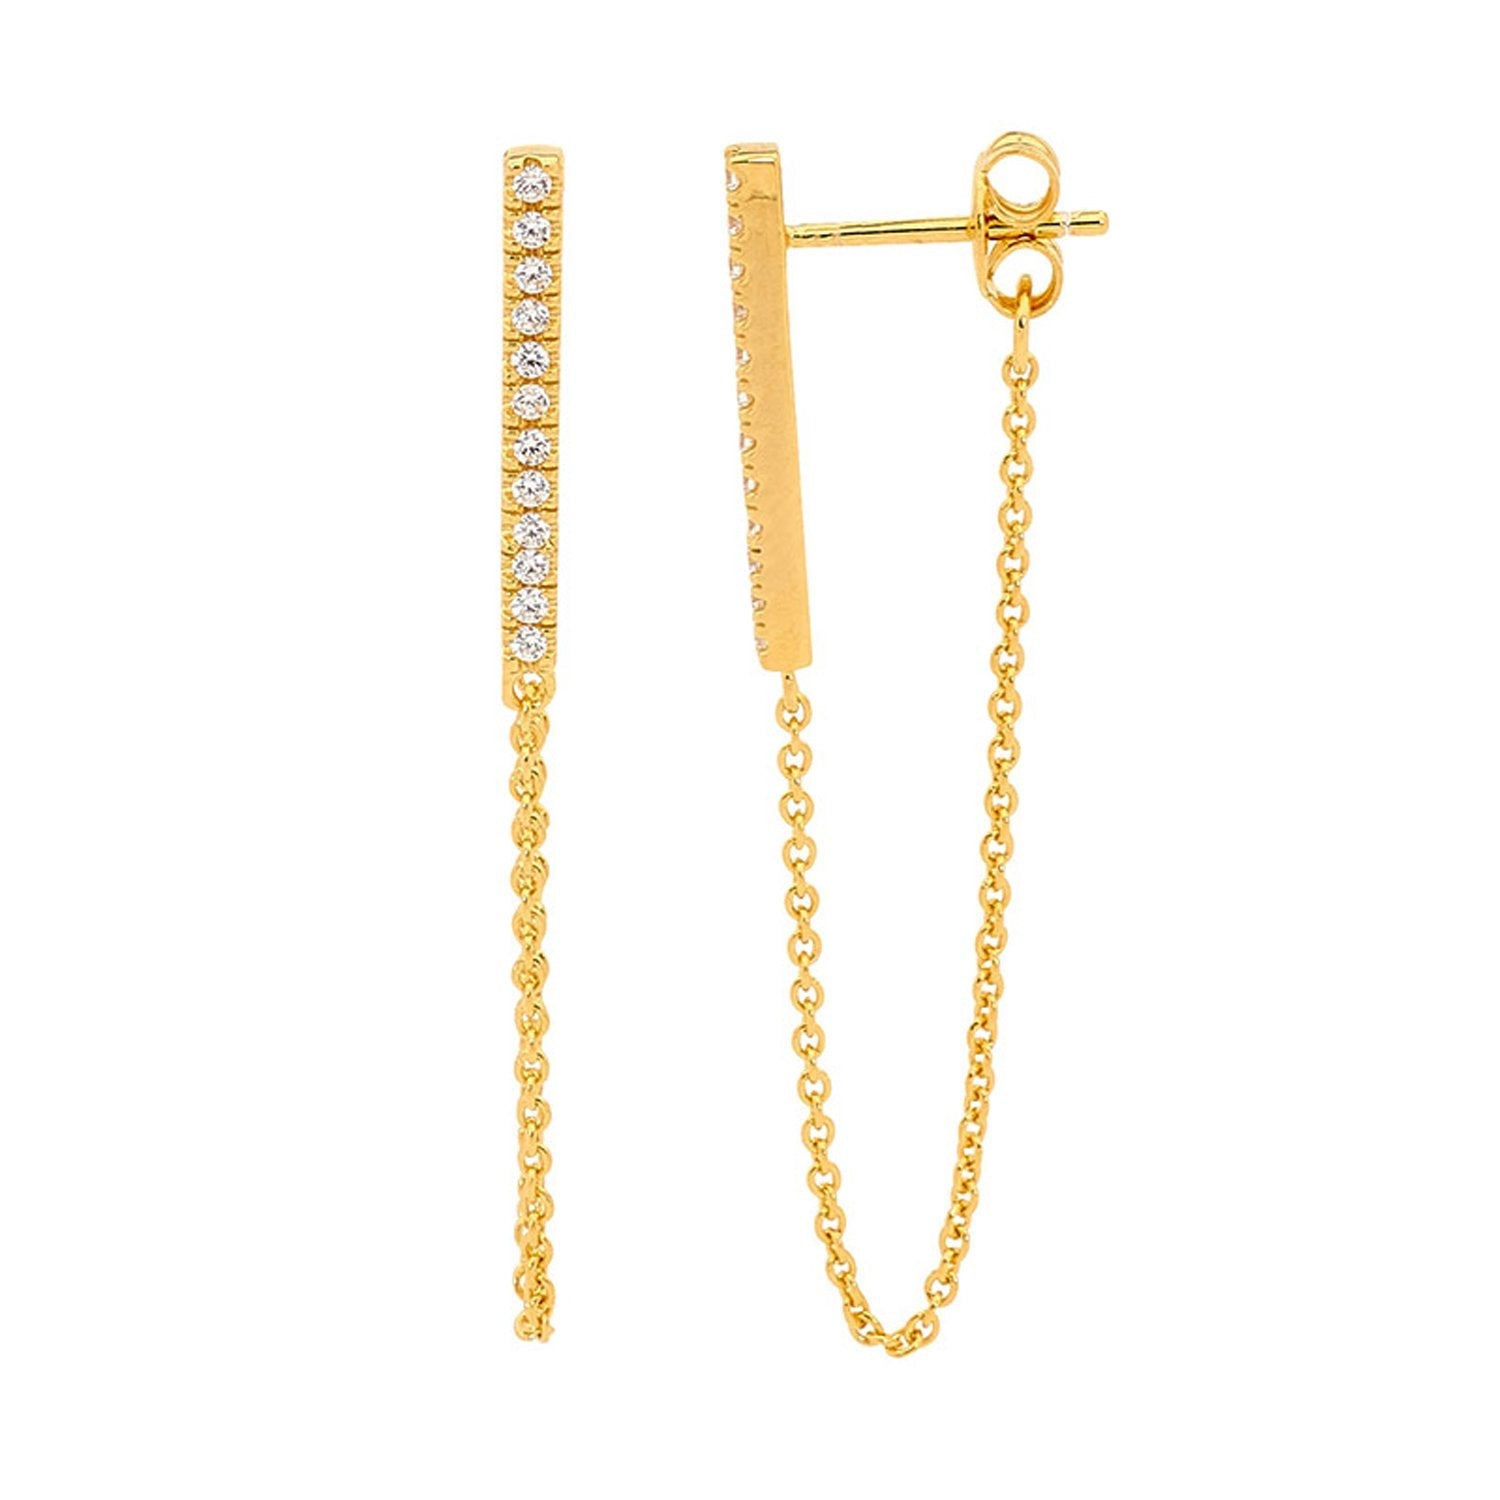 Ss Wh Cz Bar Earrings W Attached Chain Gold - Zjoosh